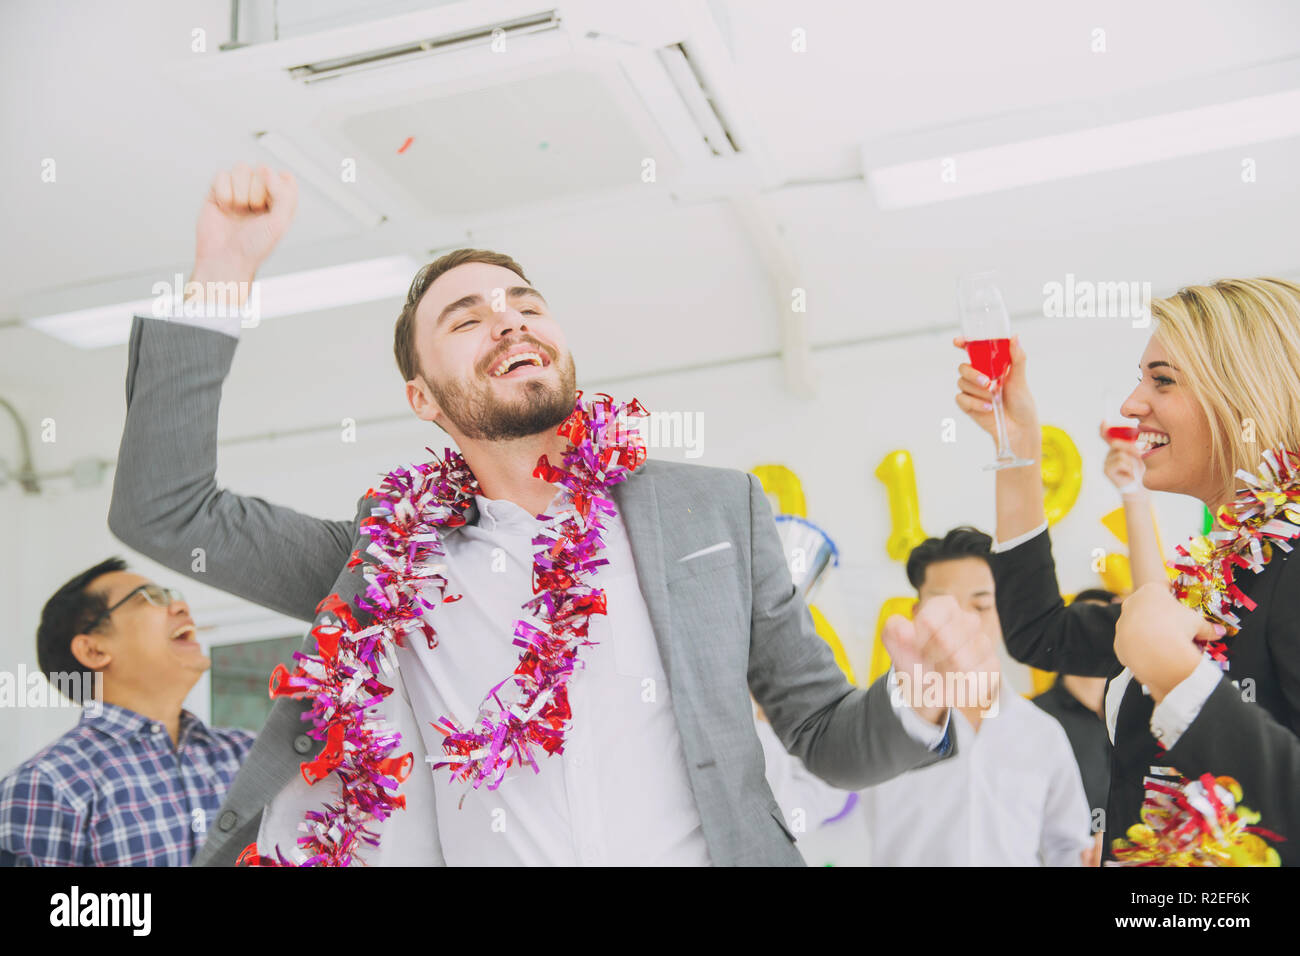 caucasian boss businessman dance in office party new year fun celebration. Stock Photo